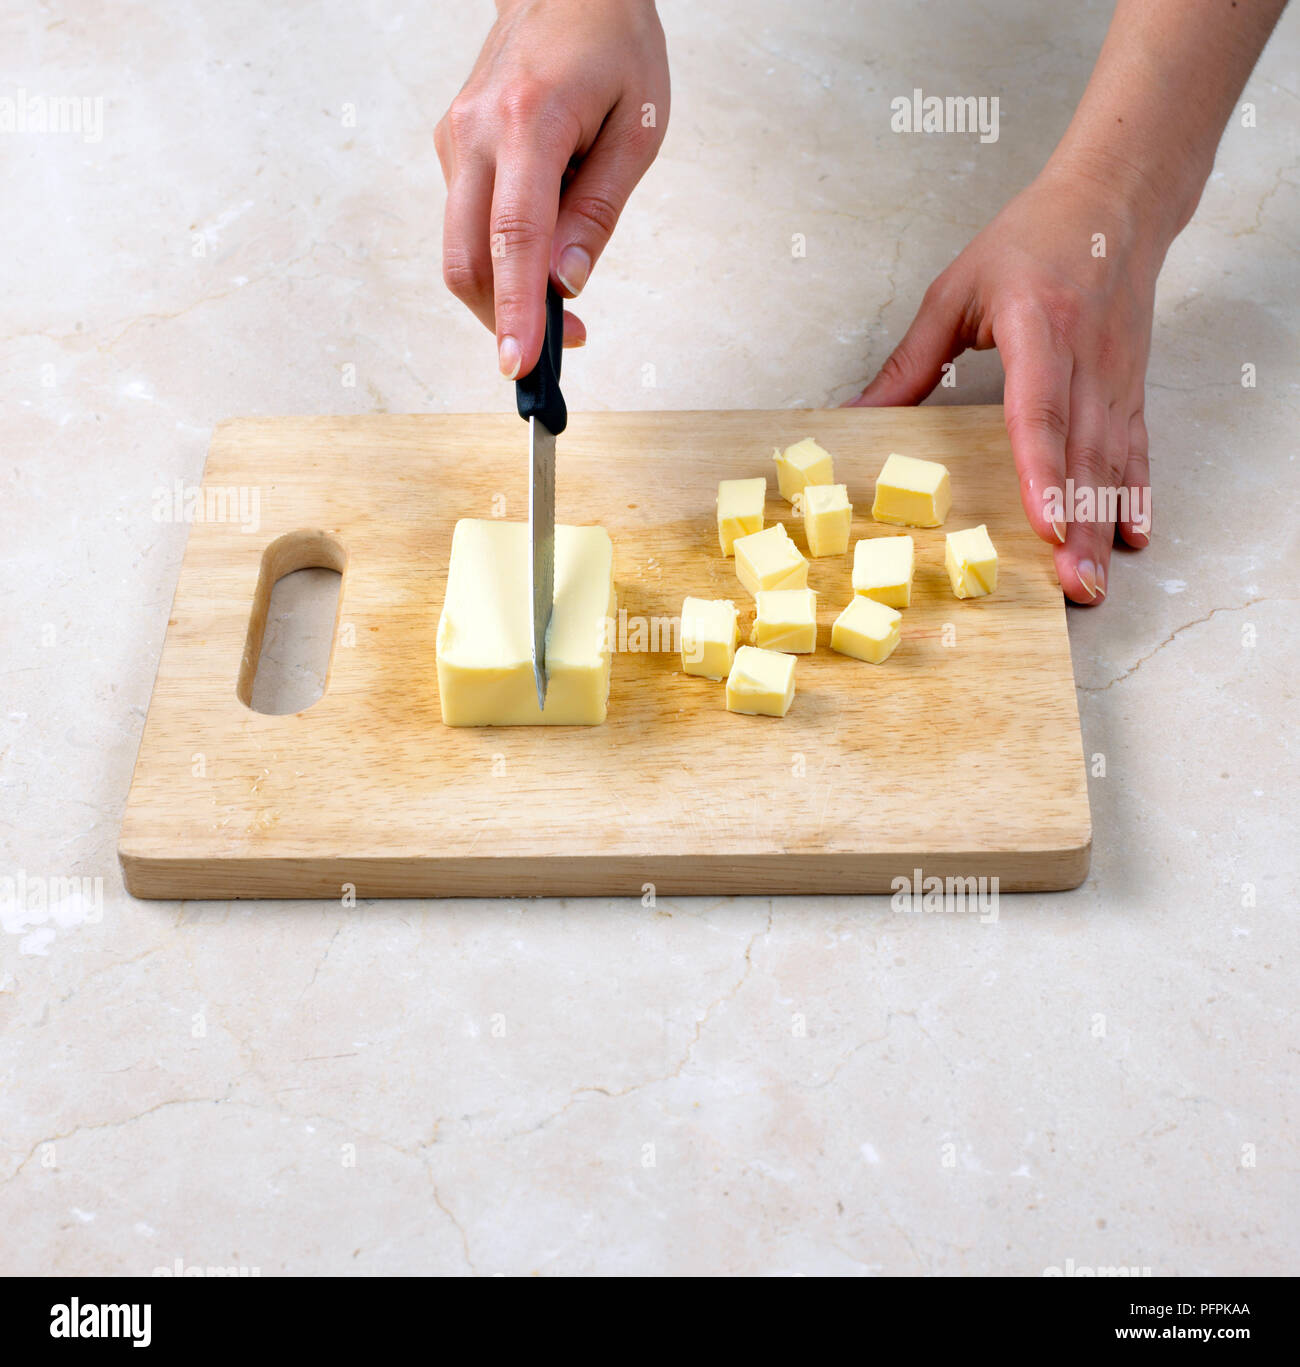 Cutting butter into cubes Stock Photo